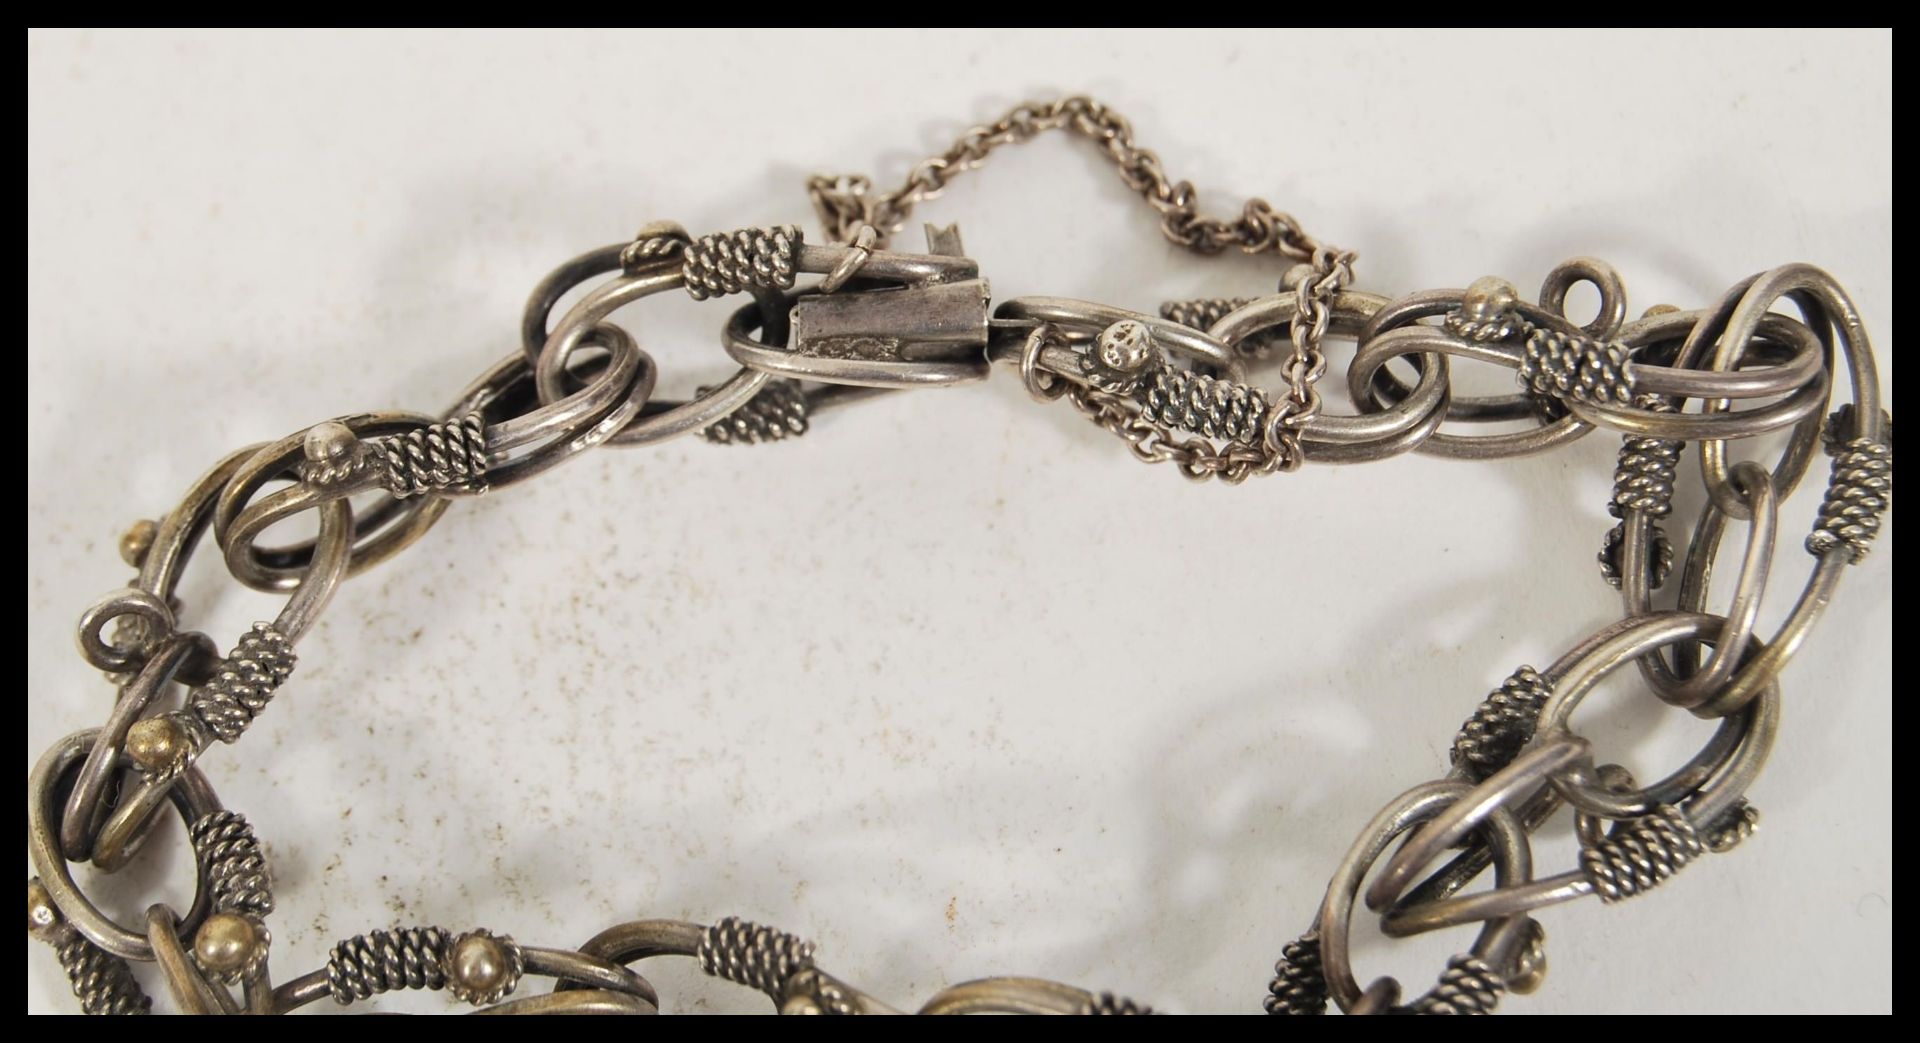 A stamped 800 silver bracelet having decorative links with rope chain detailing with a charm - Image 4 of 4